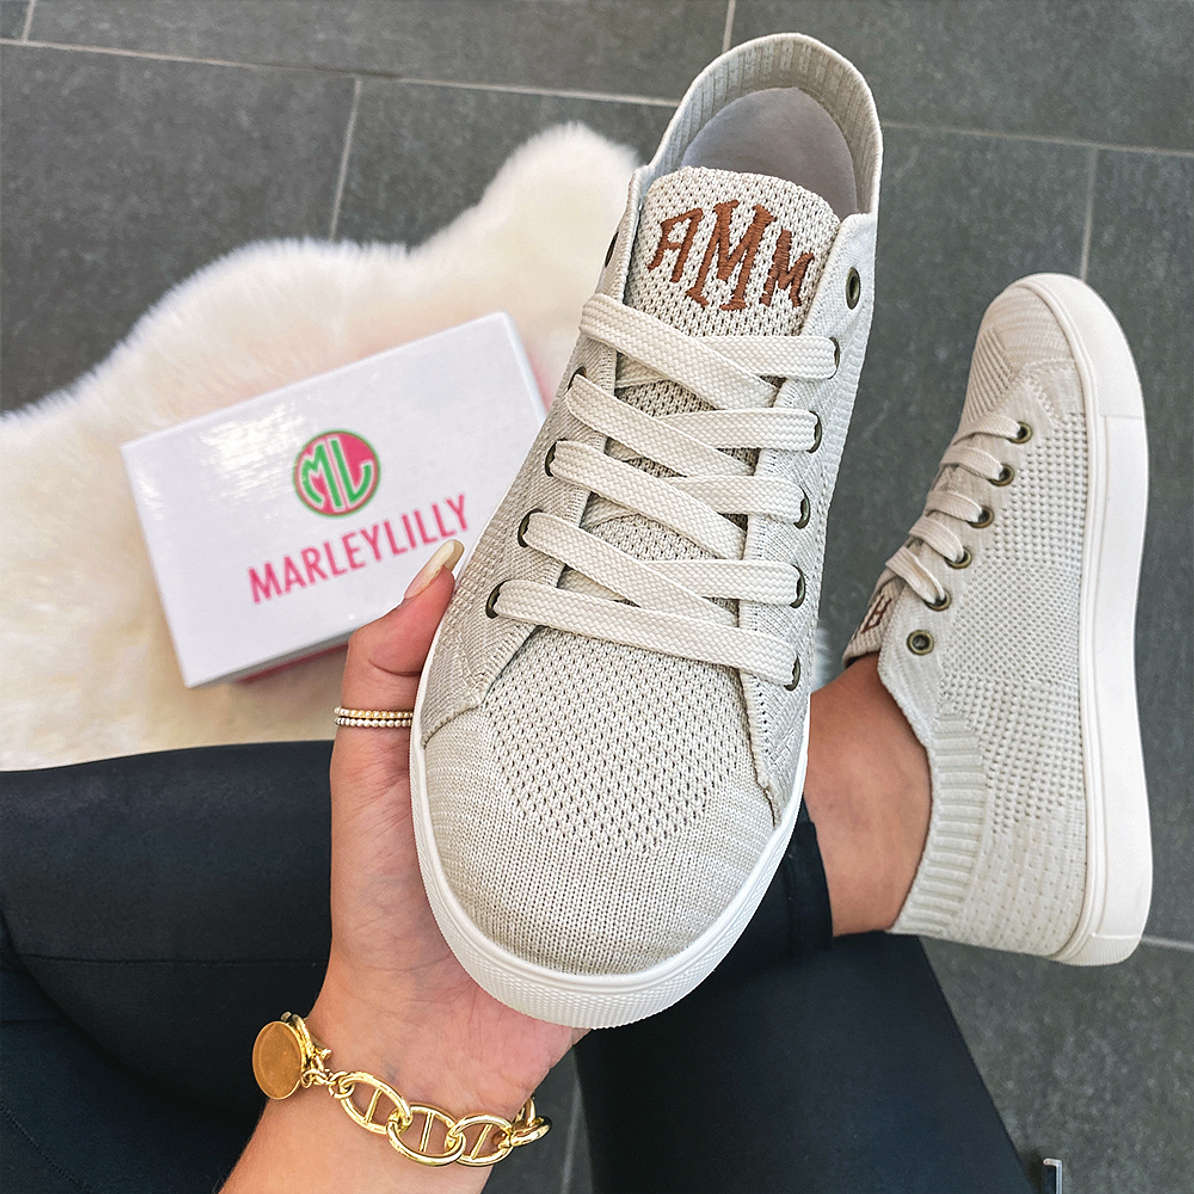 Stretchy Personalized Sneakers - Marleylilly